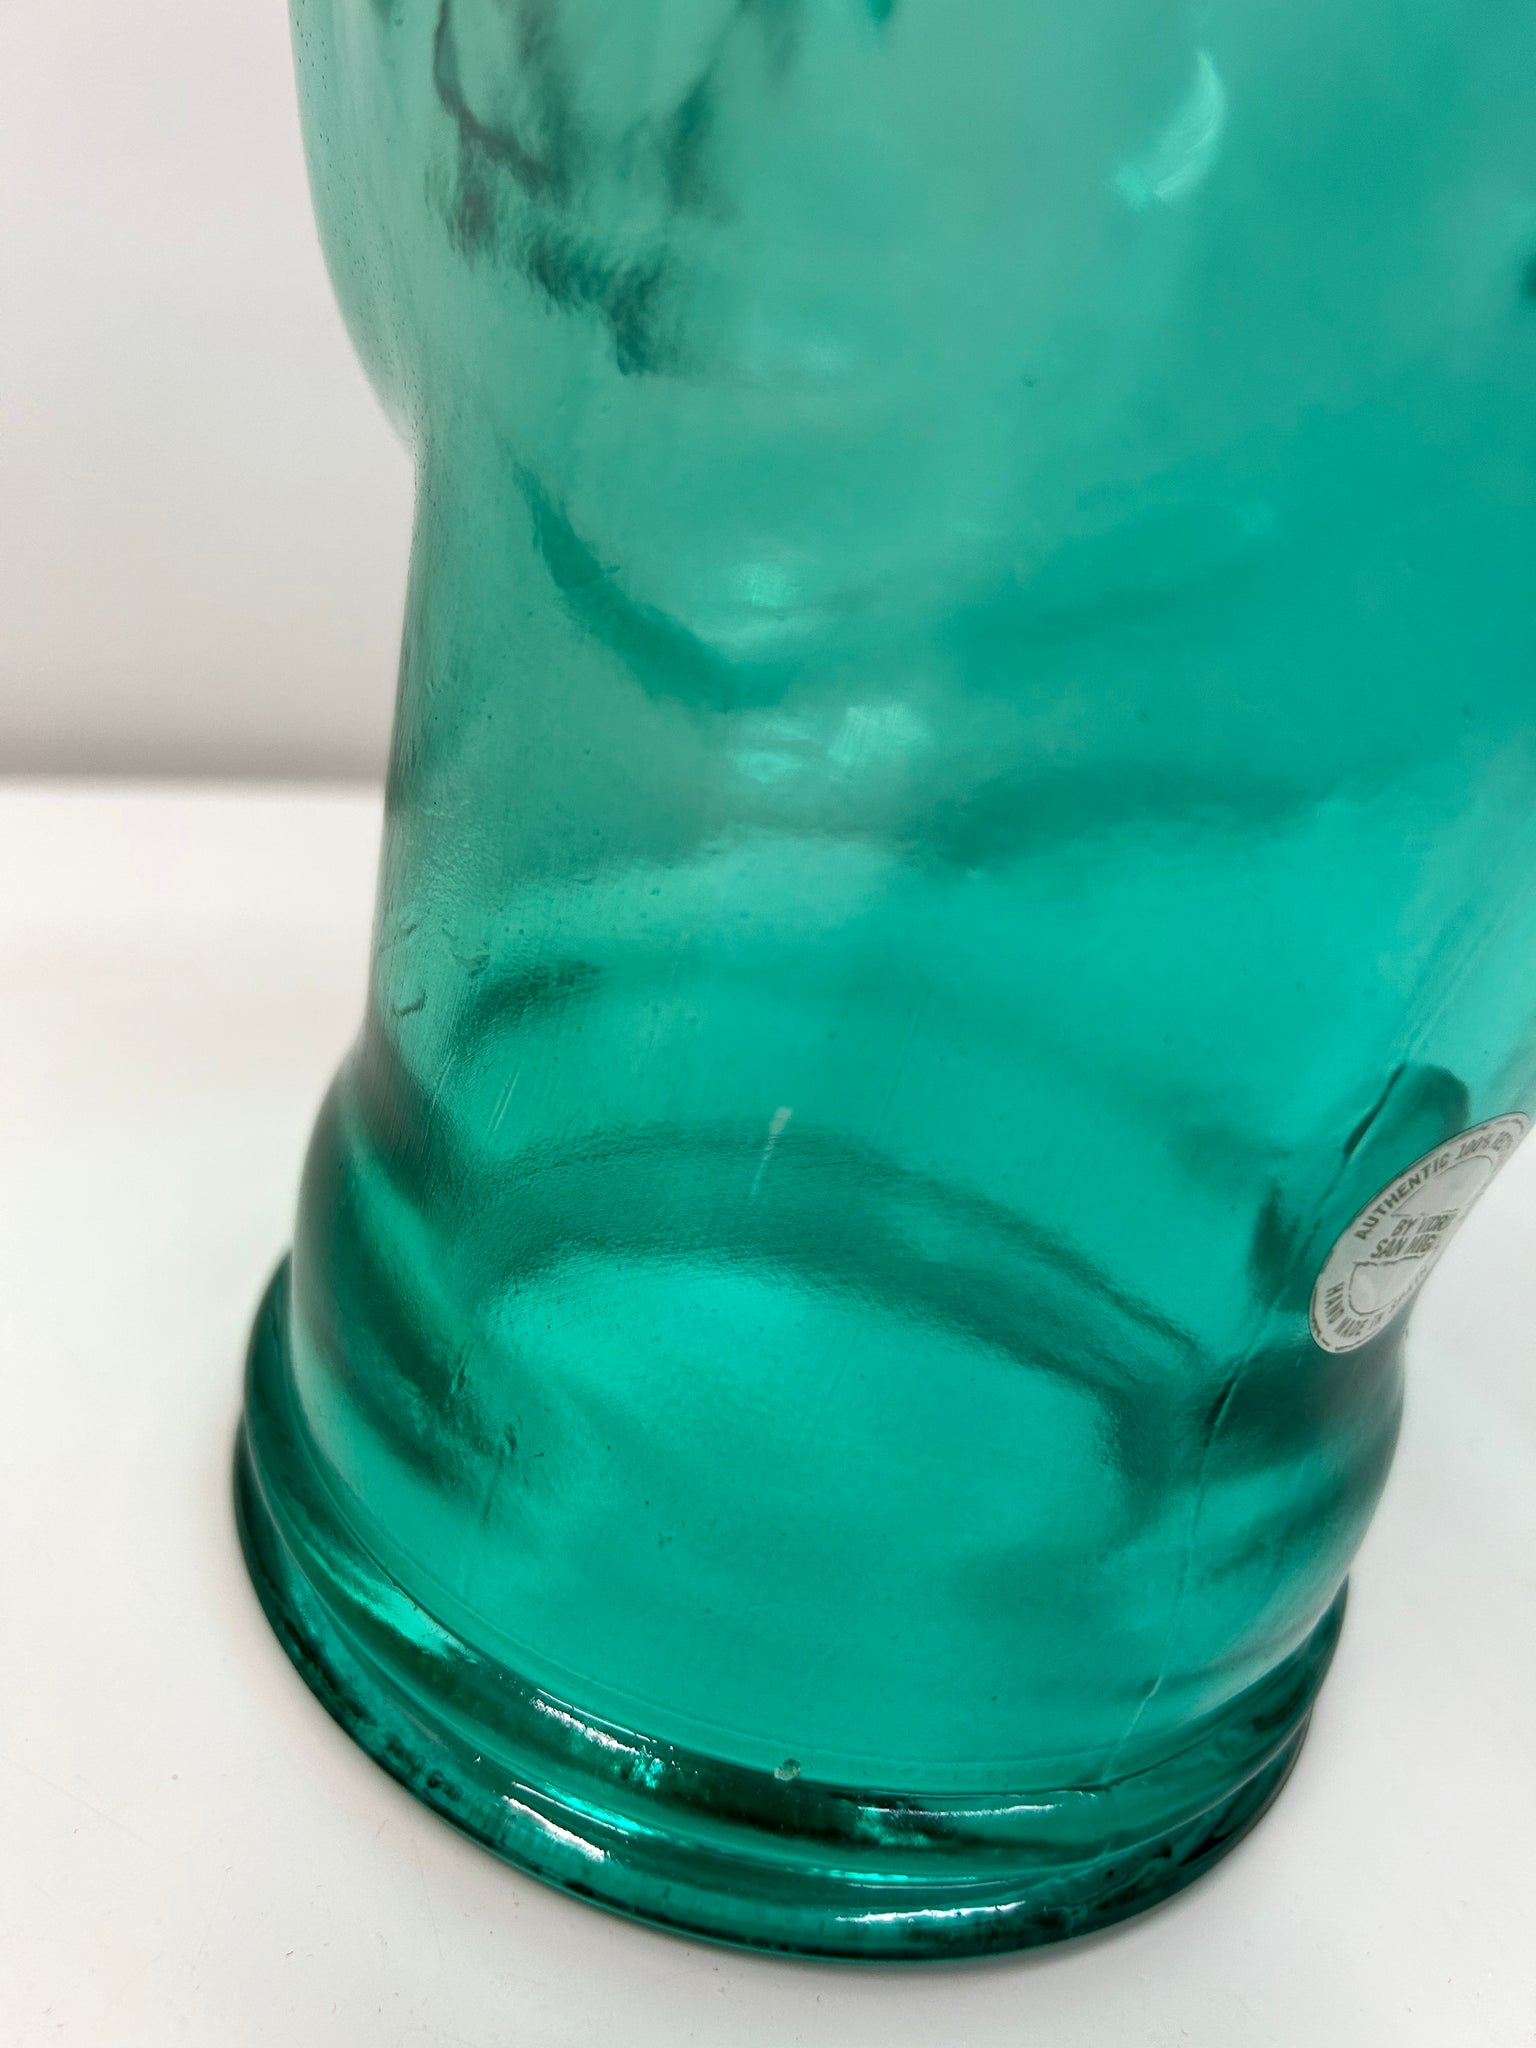 Turquoise blue glass mannequin head